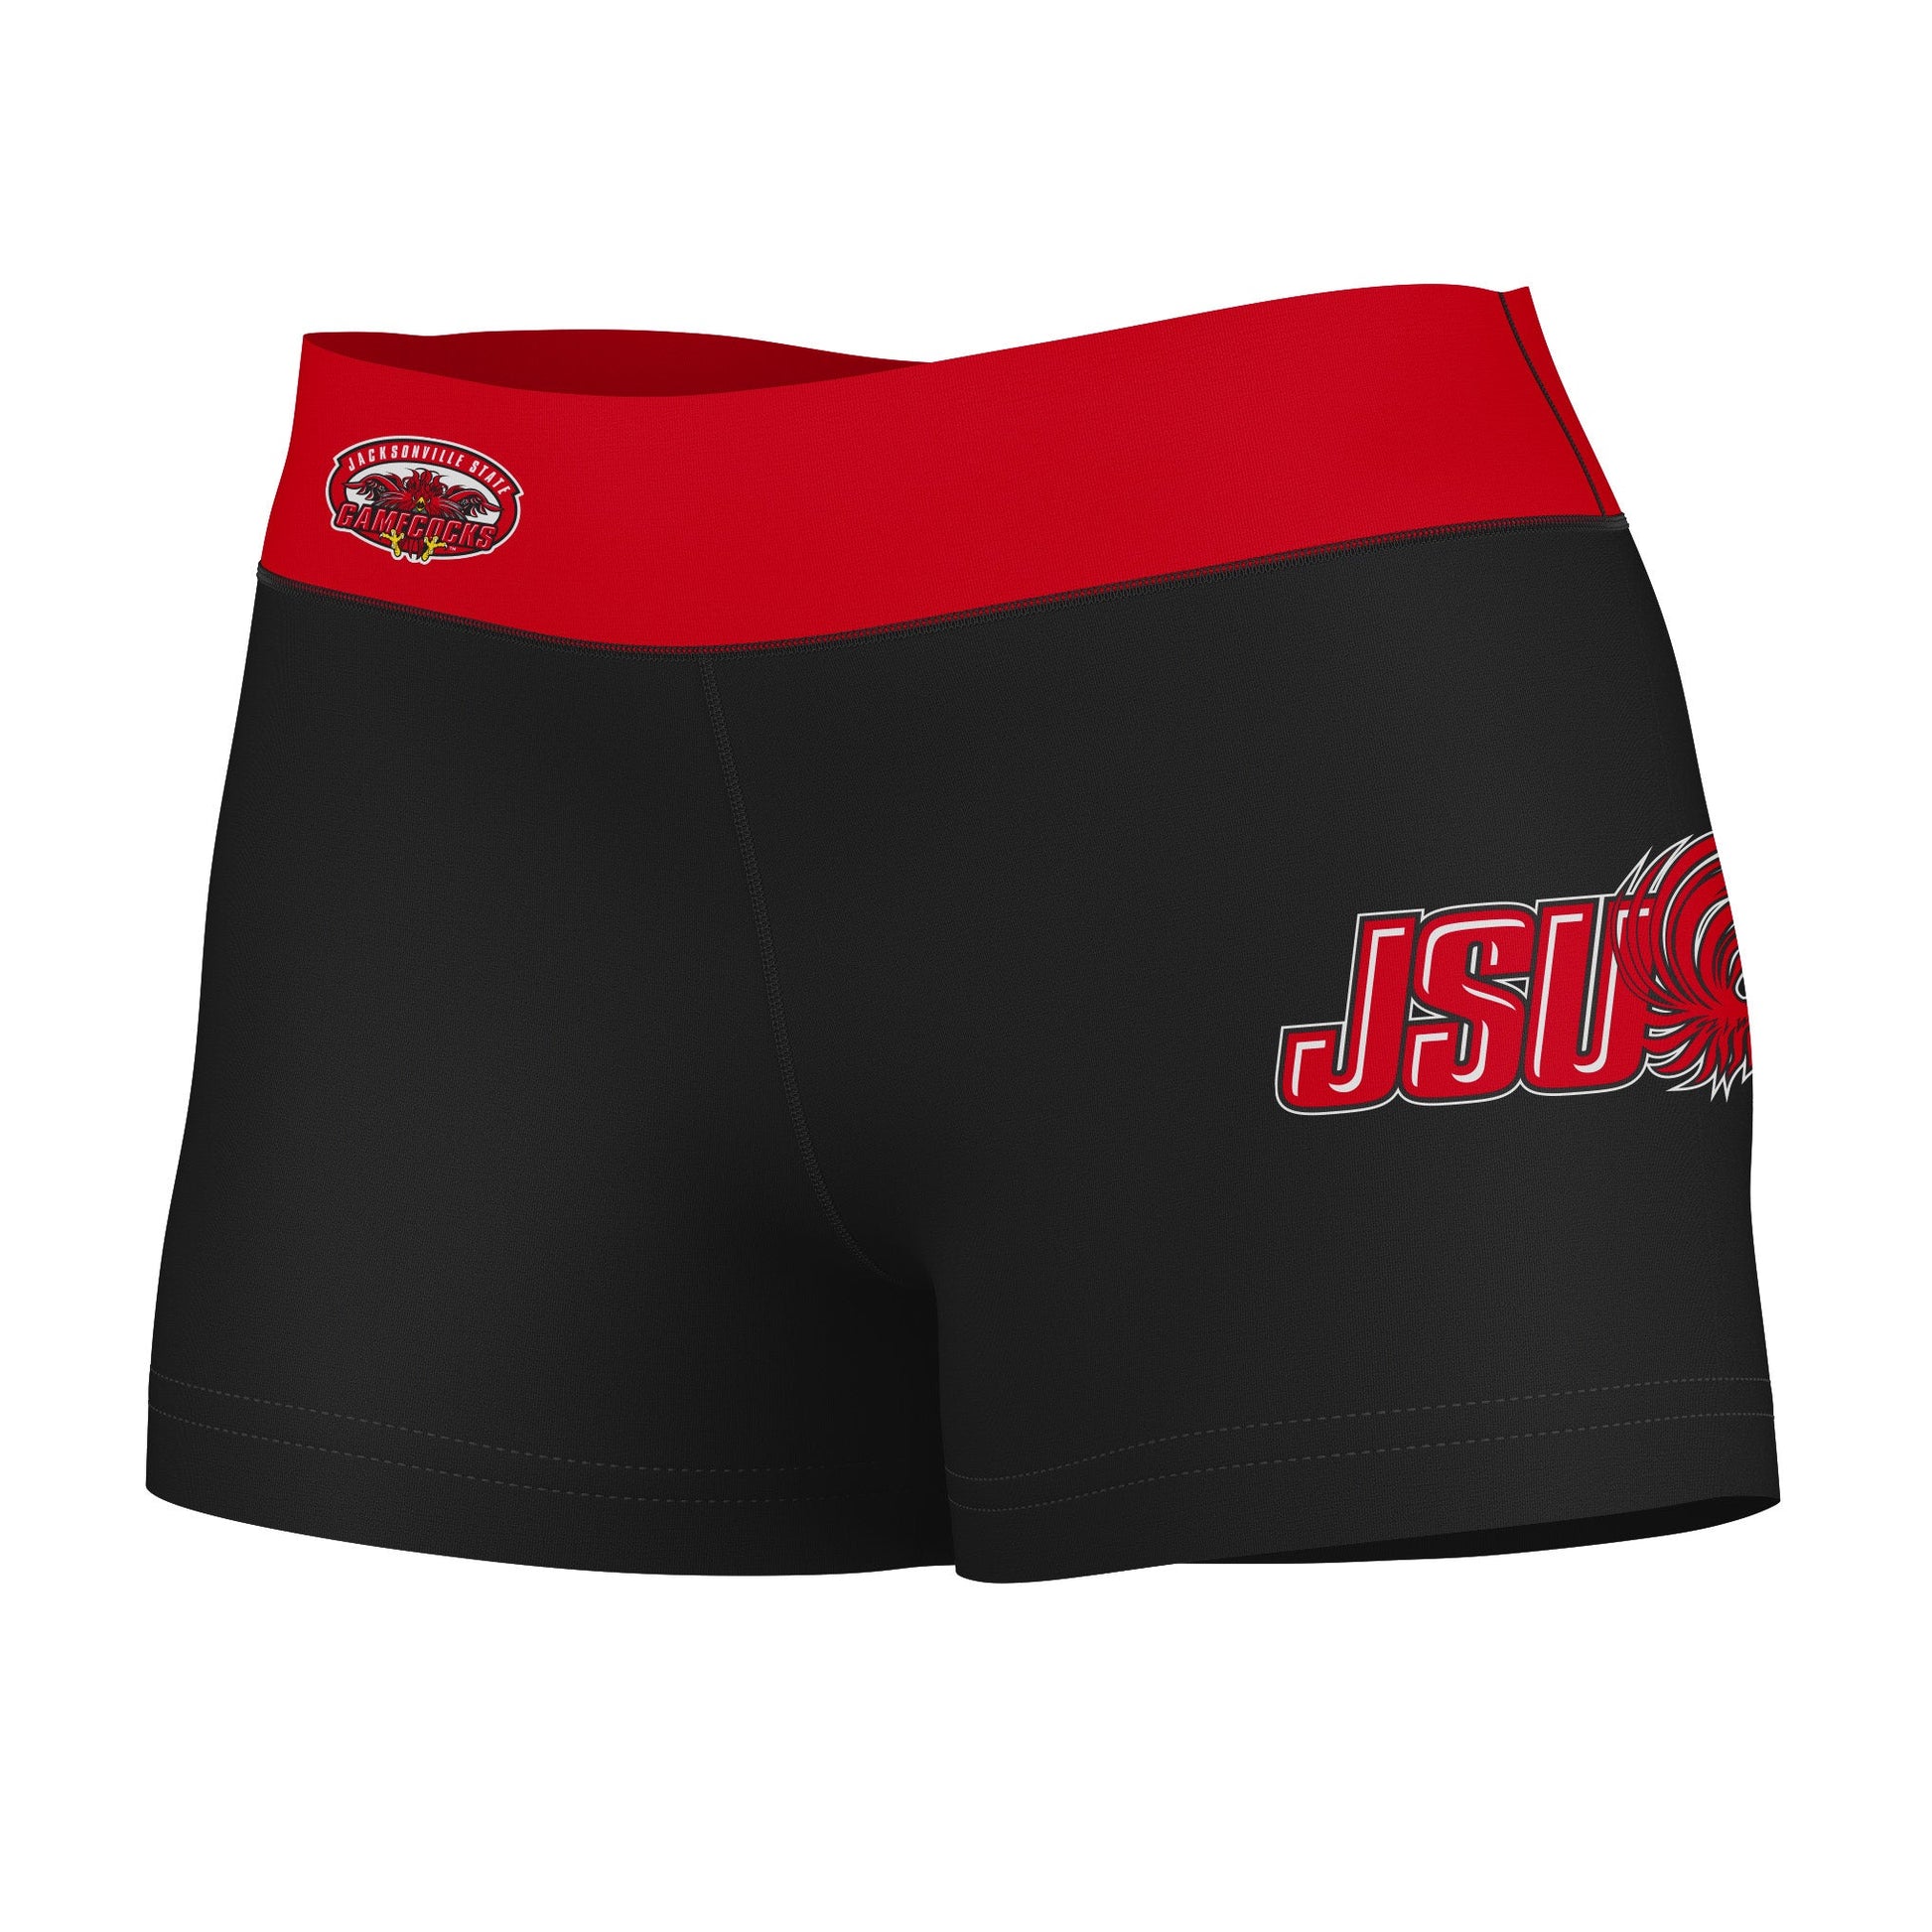 JSU Gamecocks Vive La Fete Game Day Logo on Thigh and Waistband Black & Red Women Yoga Booty Workout Shorts 3.75 Inseam"